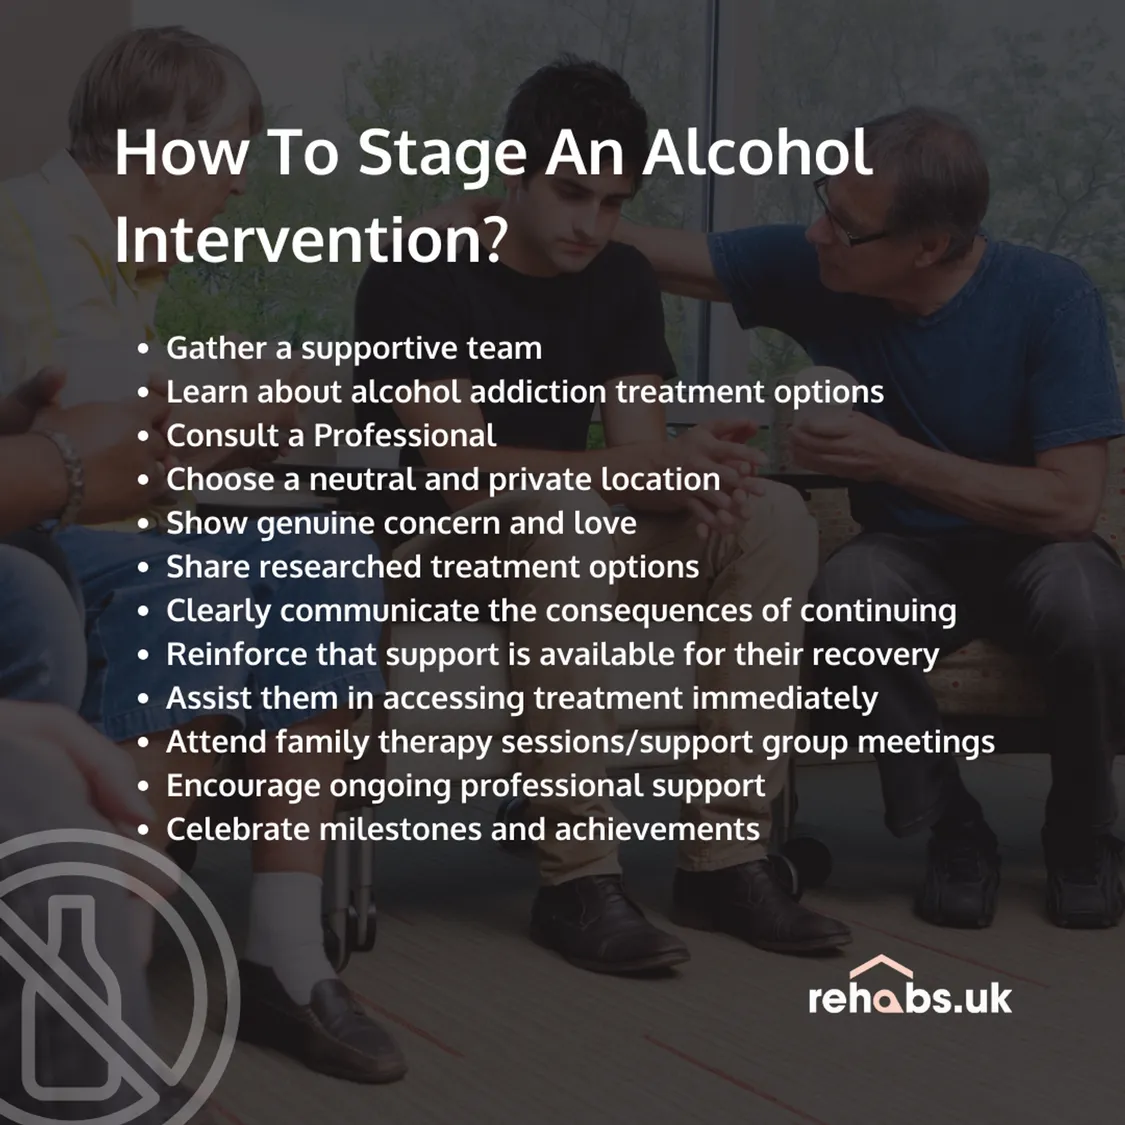 Embarking on the challenging task of staging an alcohol intervention requires thoughtful planning and unwavering support. 🤝  First and foremost, assemble a caring team to surround your loved one. Educate yourself on available treatment options and seek guidance from professionals. Choose a private setting for the conversation and express genuine concern, creating an atmosphere of understanding.   Share information on treatment alternatives, it's important to clearly communicating potential consequences, but reinforce your support and provide multiple different solutions.   Beyond the intervention, attend family therapy sessions and support group meetings for collective strength.   If you require support with an alcohol intervention please don't hesitate to get in touch. Also check out our website for a huge list of resources around various addictions and treatment options.